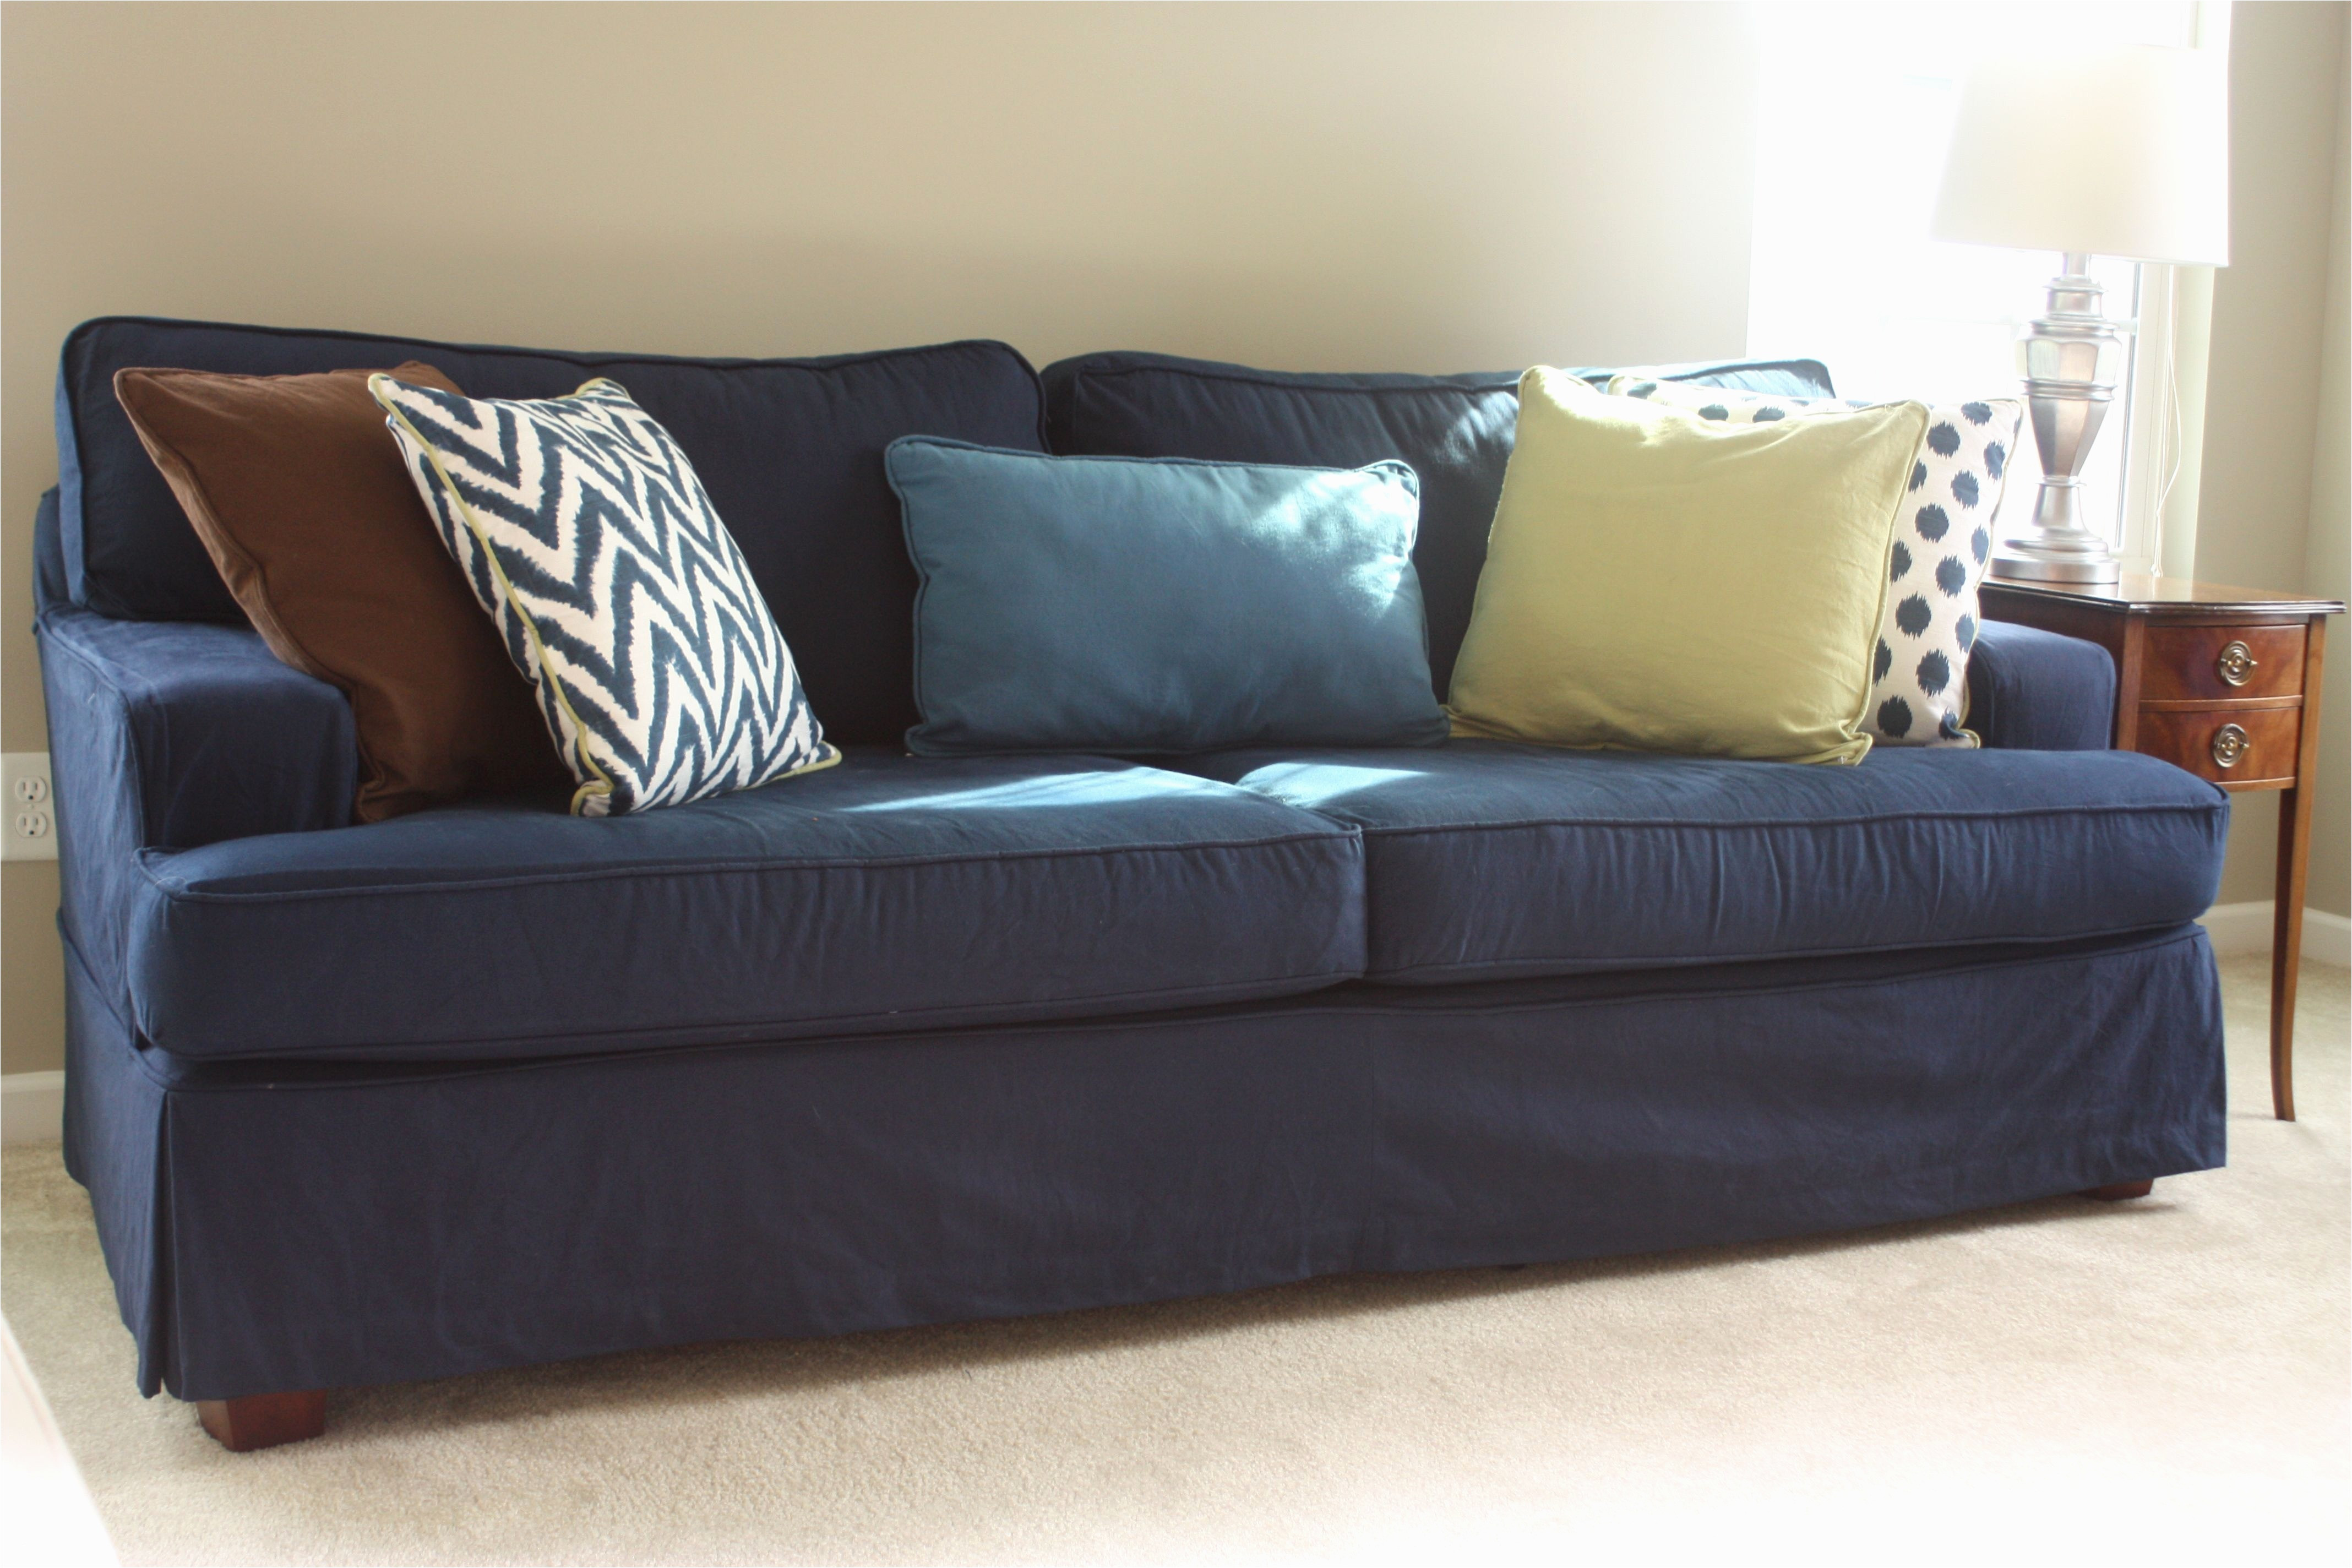 full size of navy blue sectional sofa inspirational awesome slipcover sectional sofa minimalist modern house ideas